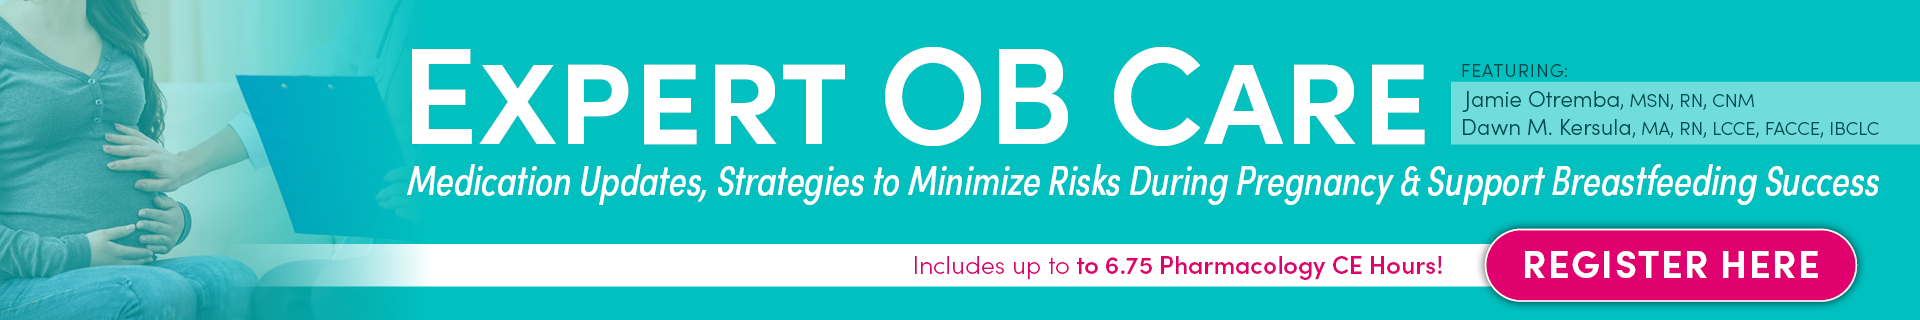 Expert OB Care: Medication Updates, Strategies to Minimize Risks During Pregnancy & Support Breastfeeding Success